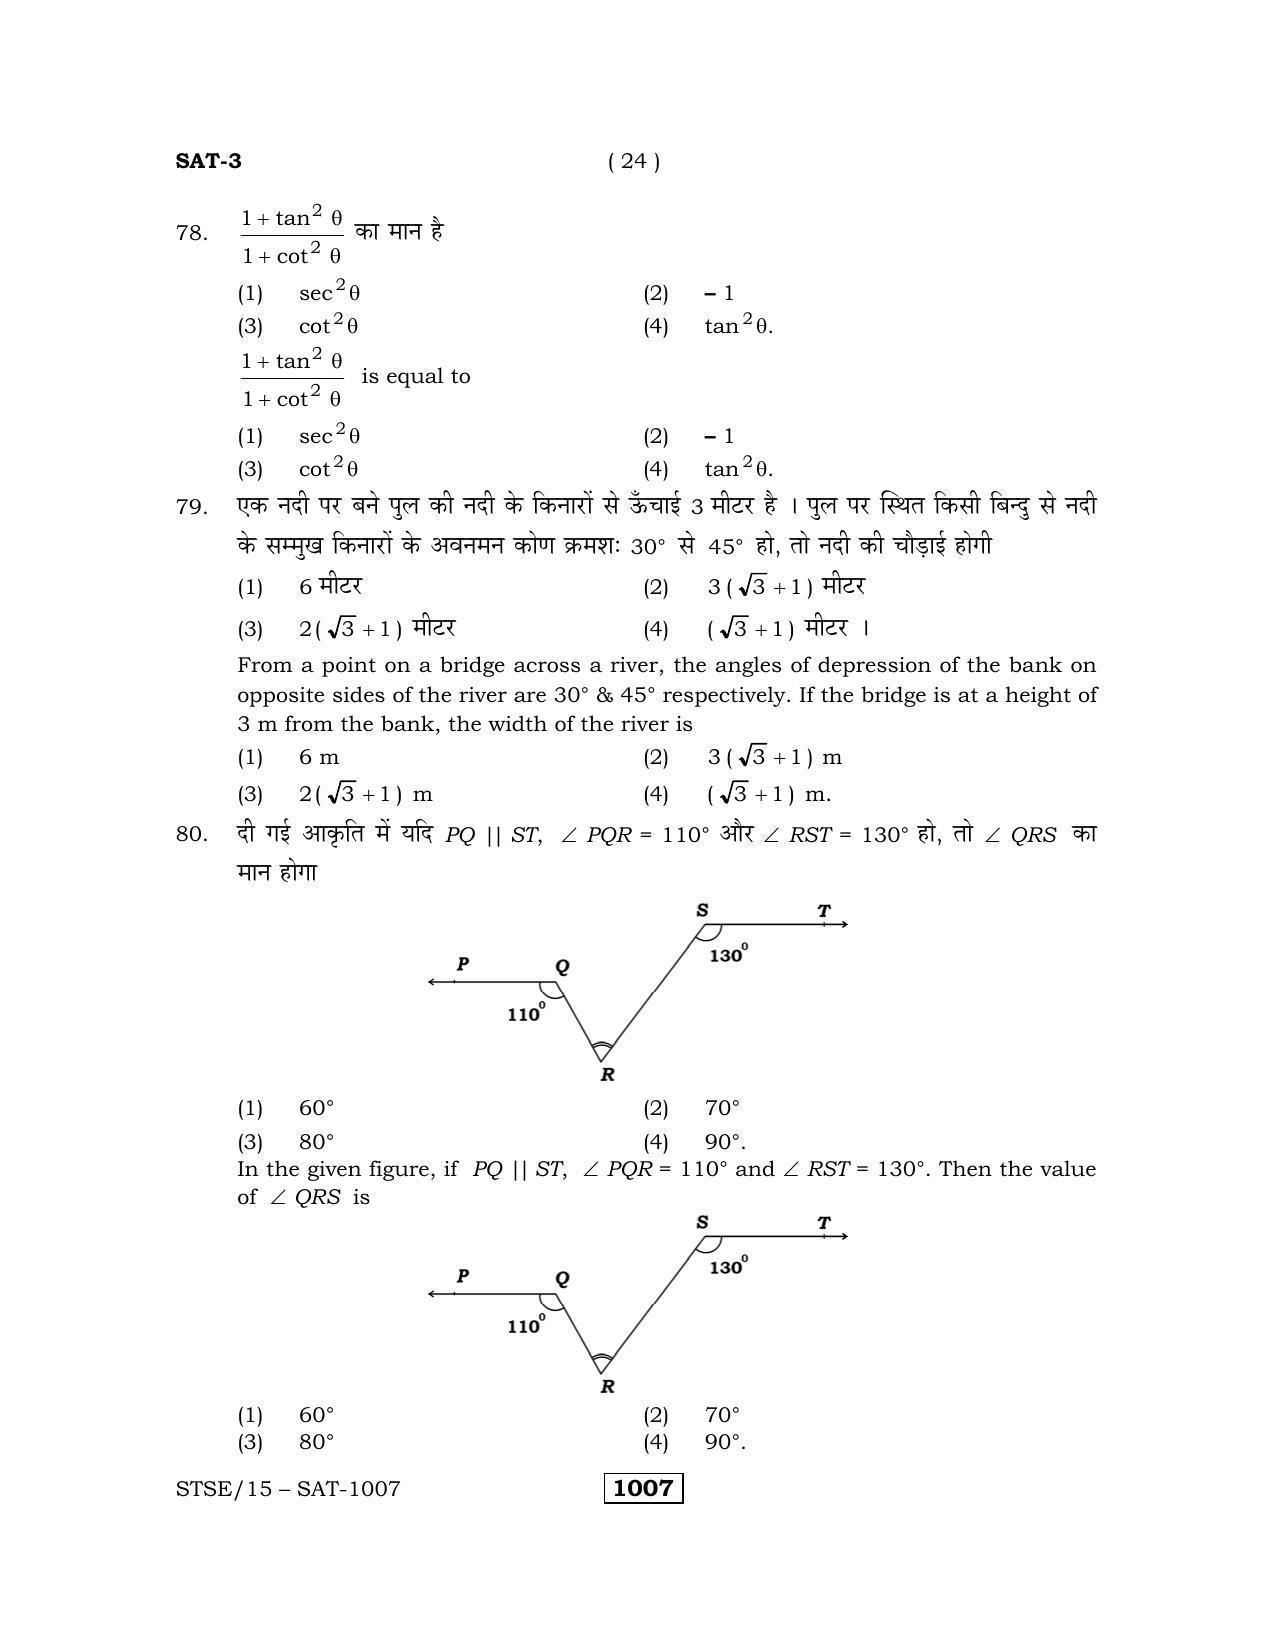 Rajasthan STSE Class 12 (Scholastic Aptitude Test) Question Paper 2015 - Page 24